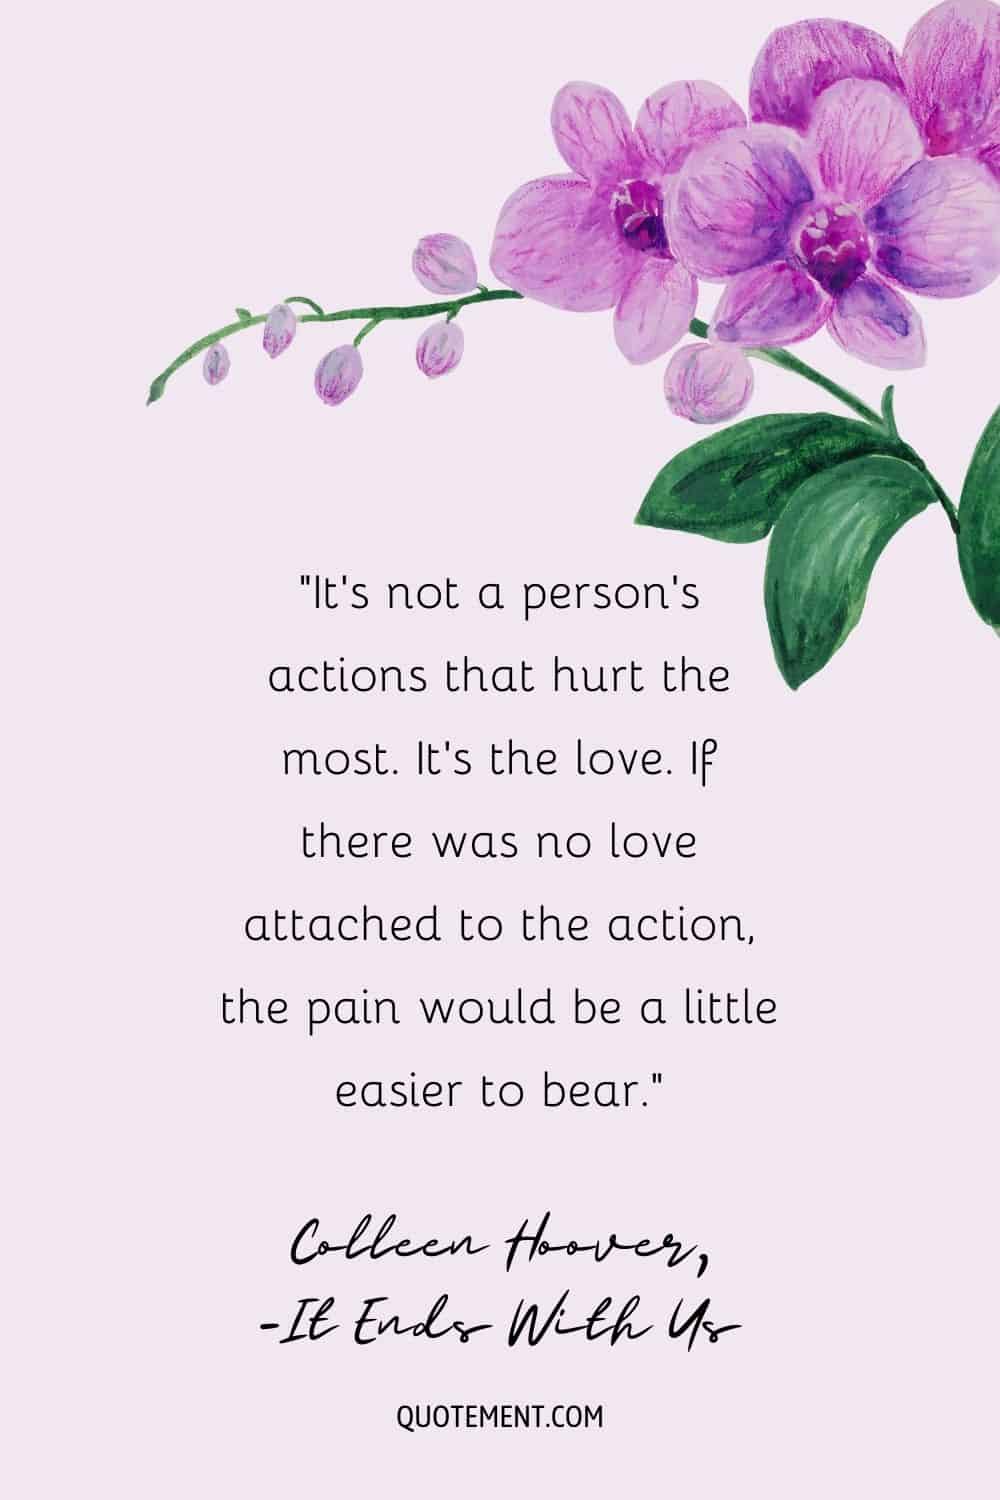 Love hurt quote by Colleen Hoover on a floral background.
